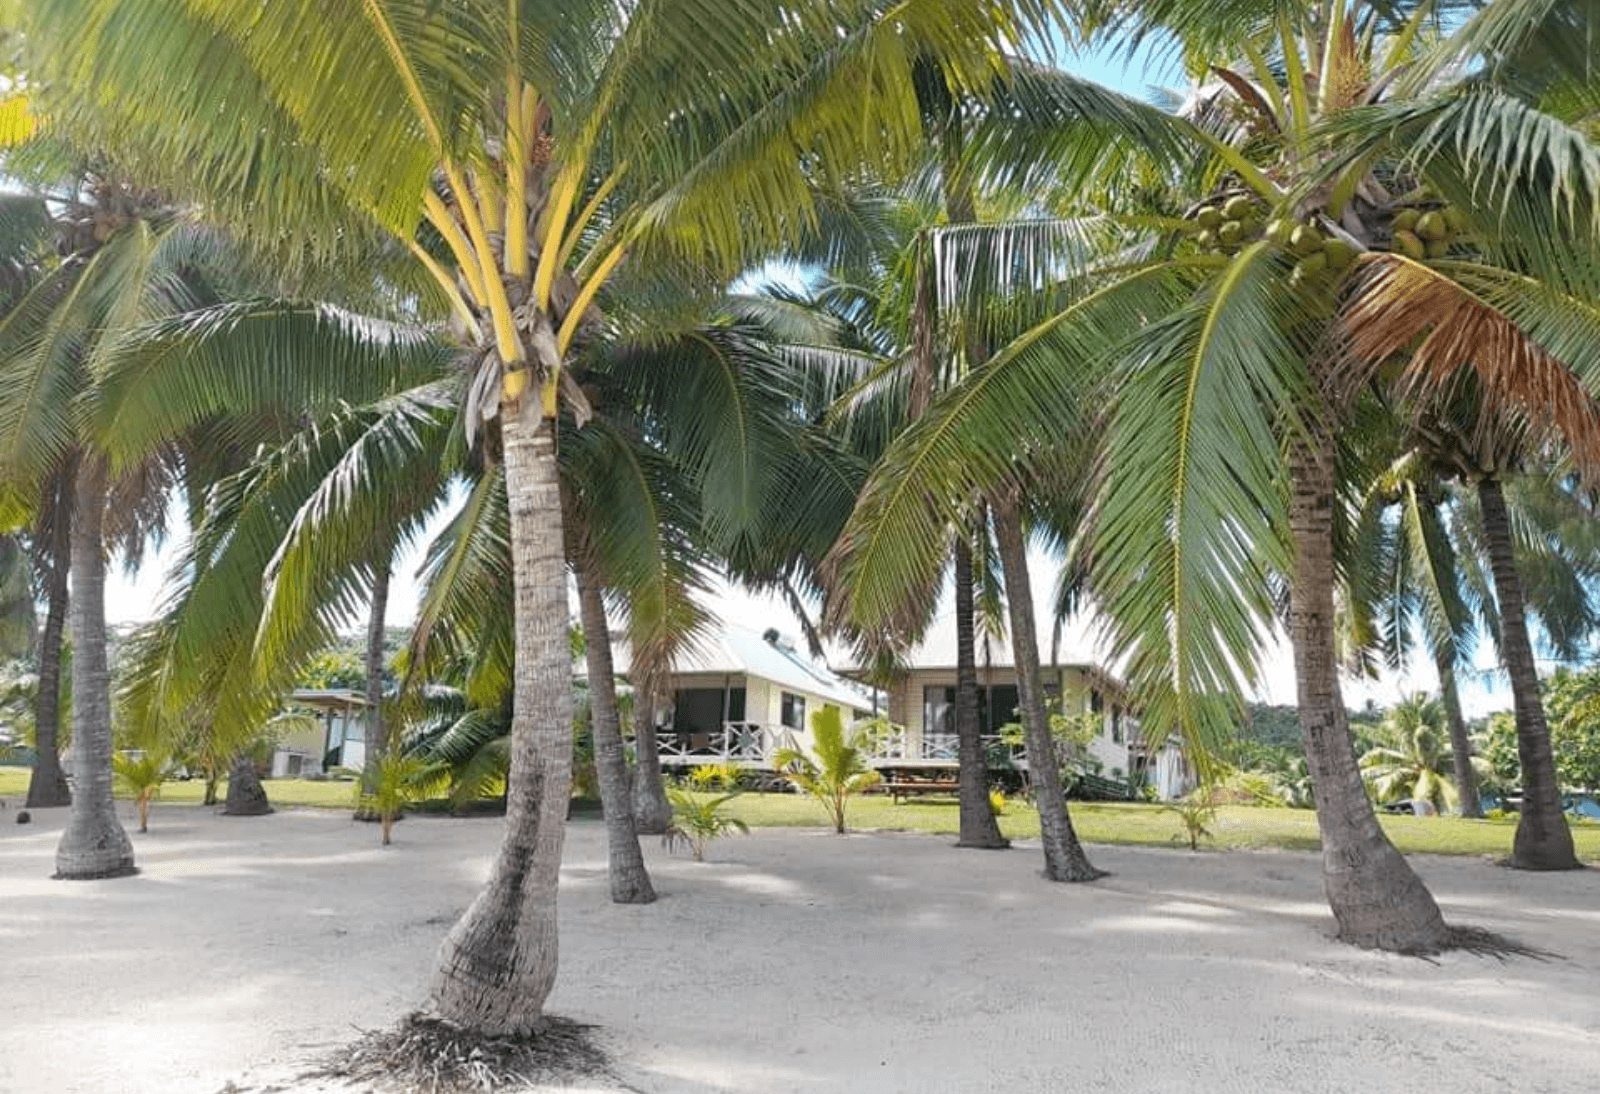 The Paprei Bungalows in the Cook Islands